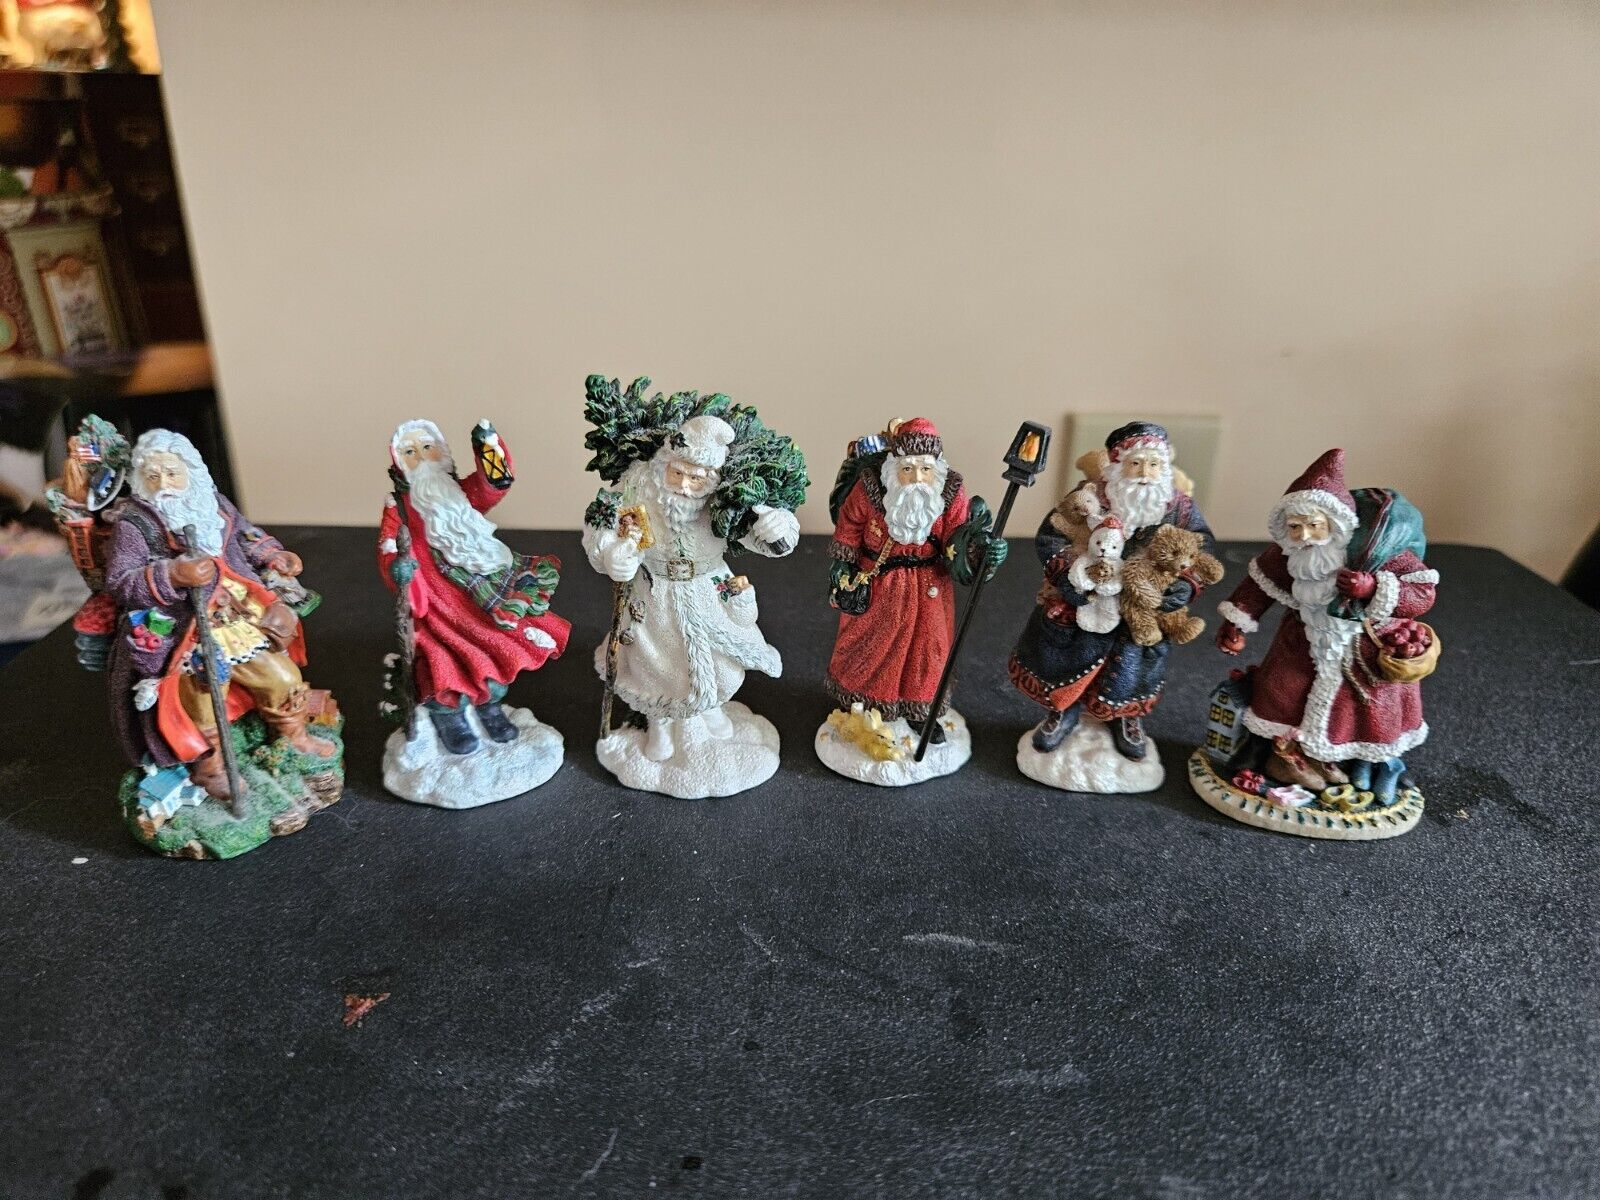 Pipka Miniature Santa  Collection  of 6. All are approximately 3 inches tall